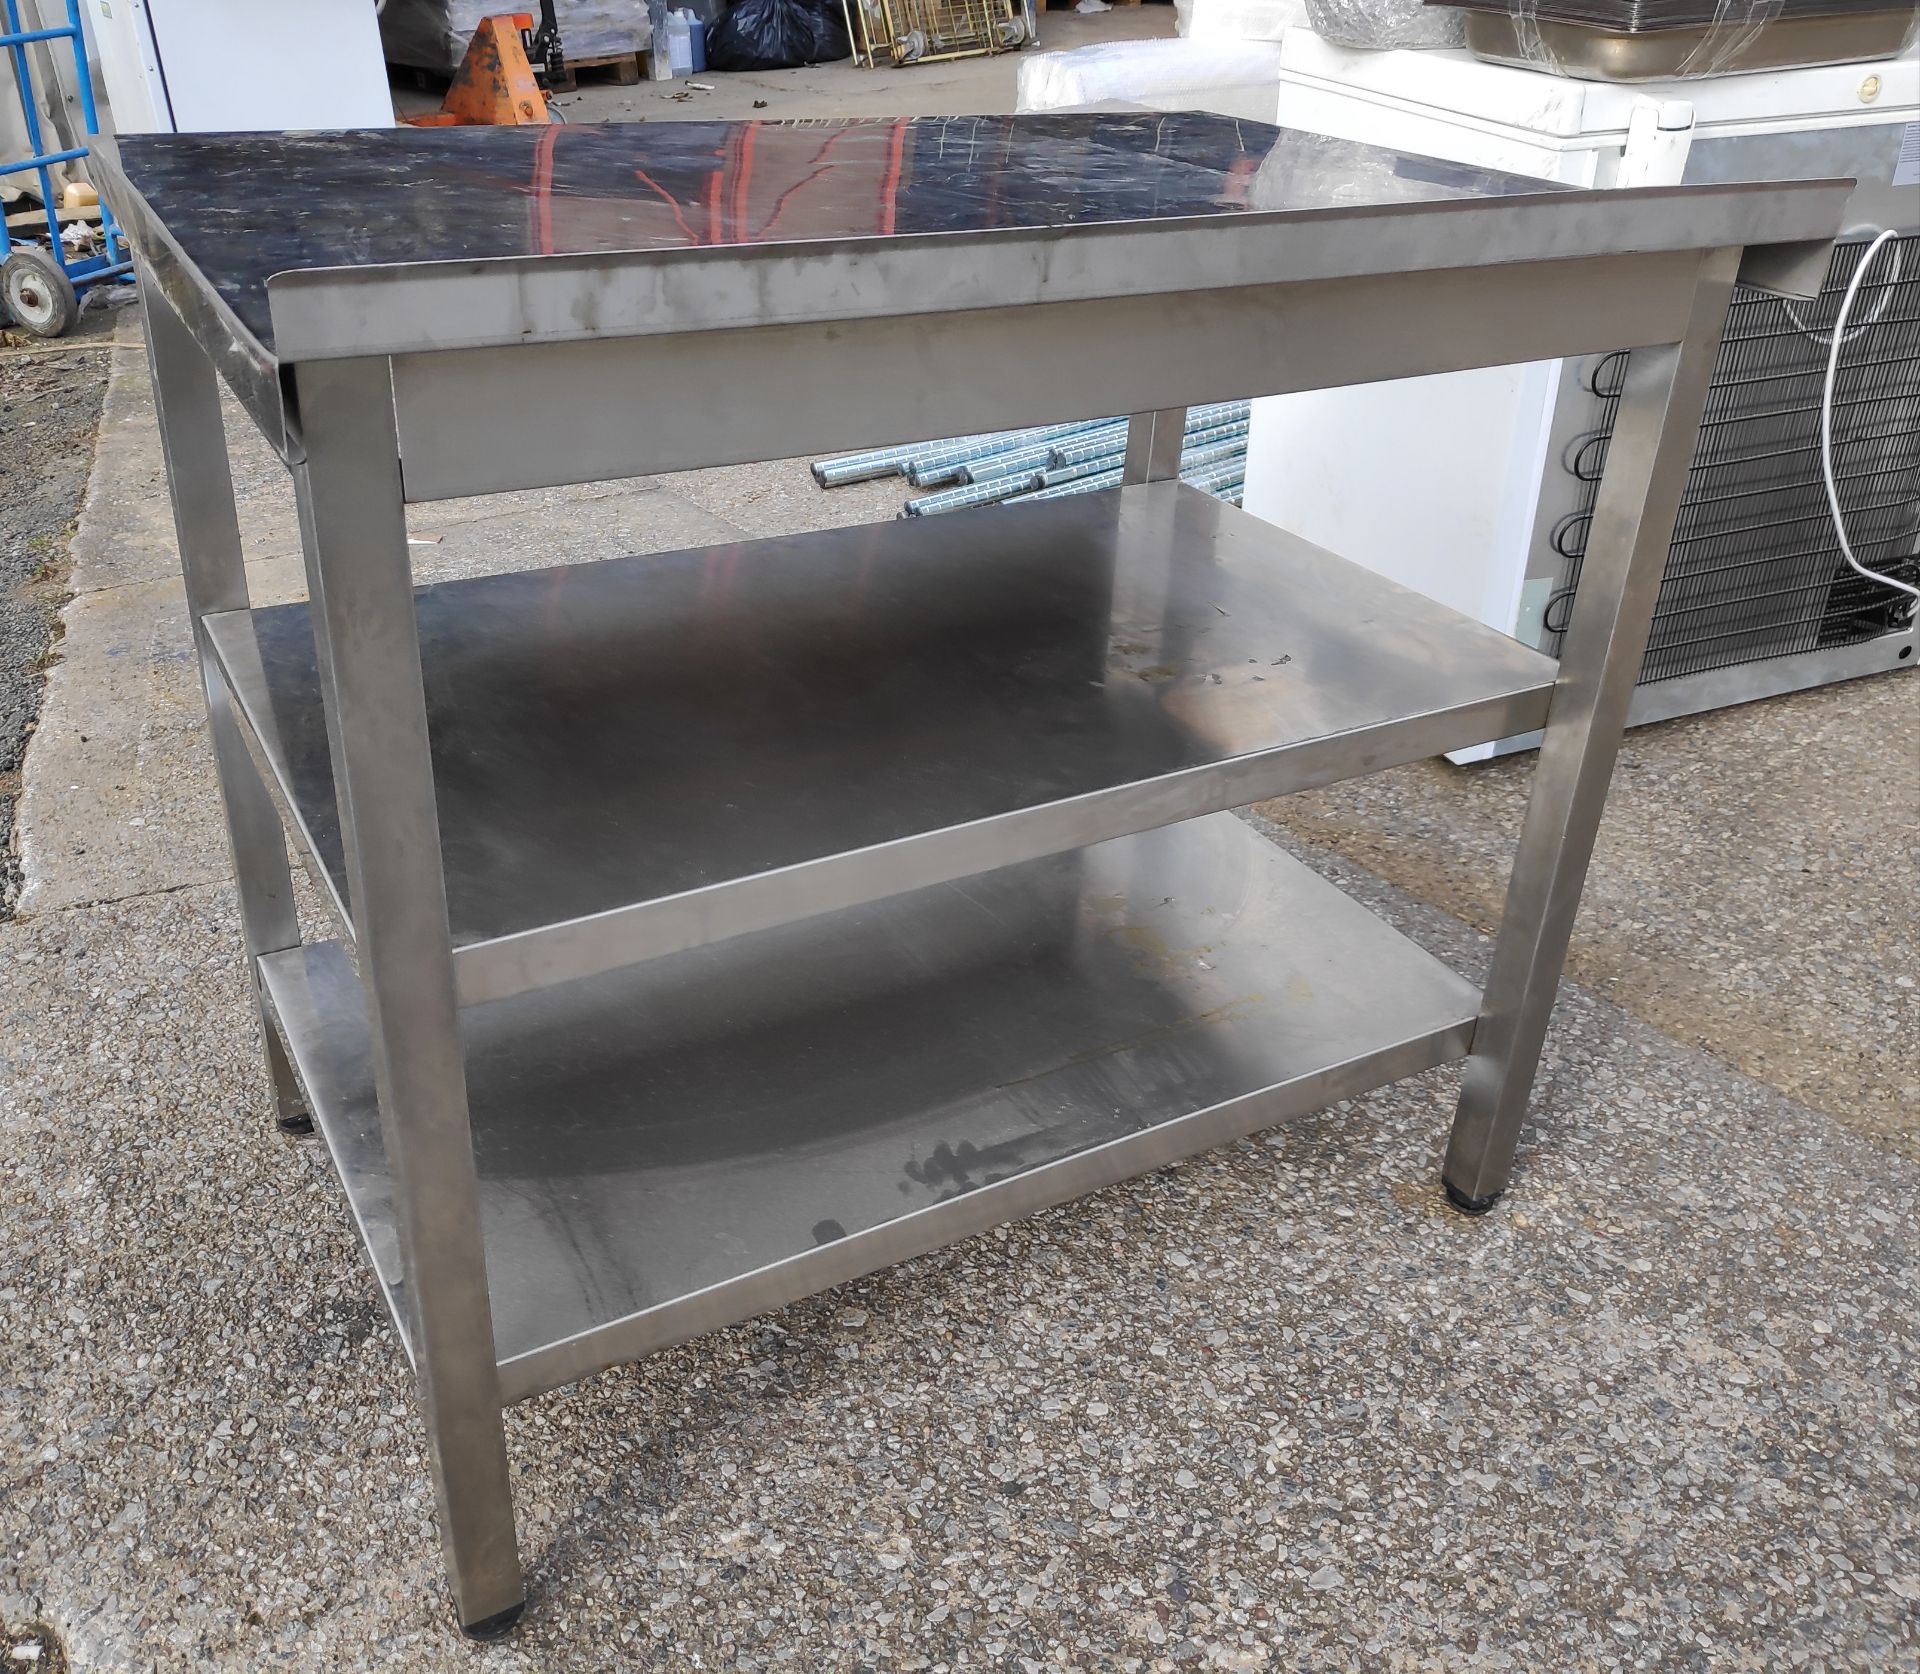 1 x Stainless Steel Prep Bench with Upstand and 2 Shelves - 95cm (L) x 66cm (D) x 90.5cm (H) - - Image 8 of 8